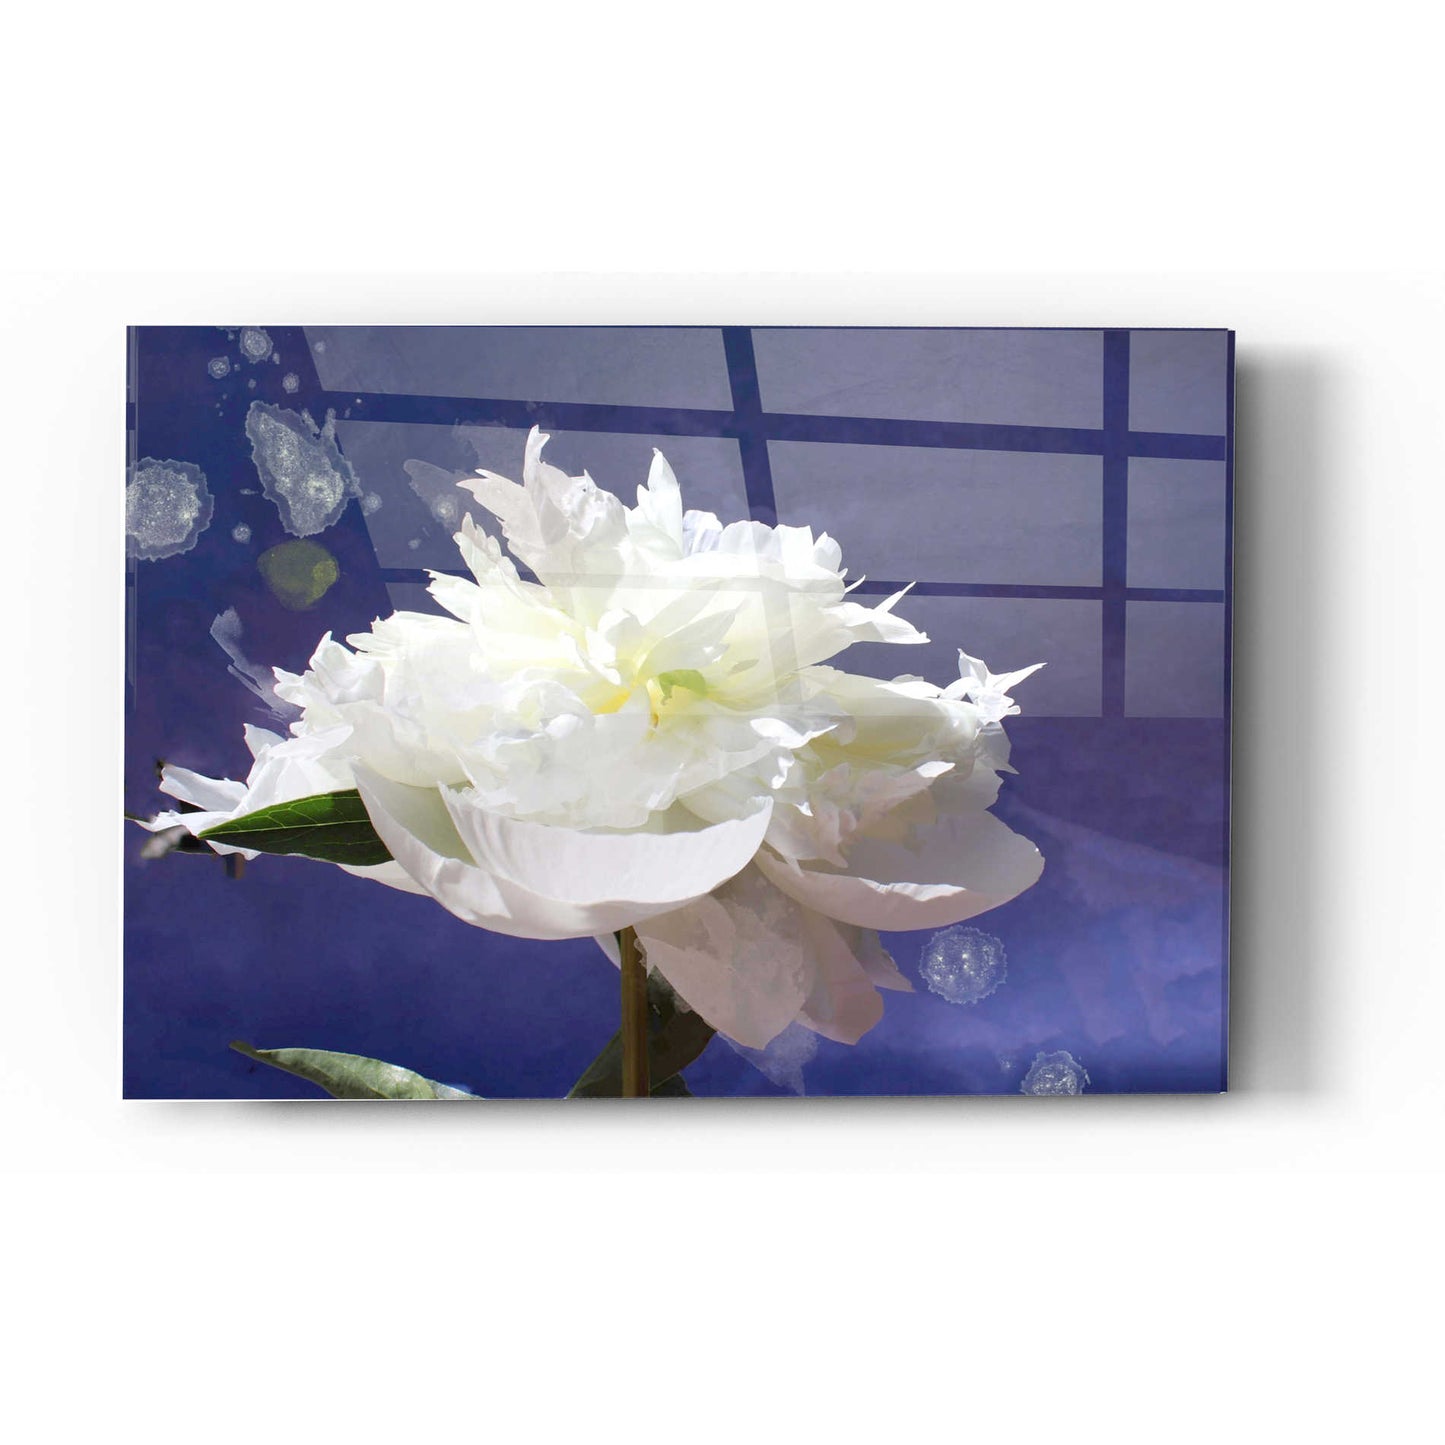 Epic Art 'White Peony-Scents of Heaven' by Irena Orlov, Acrylic Glass Wall Art